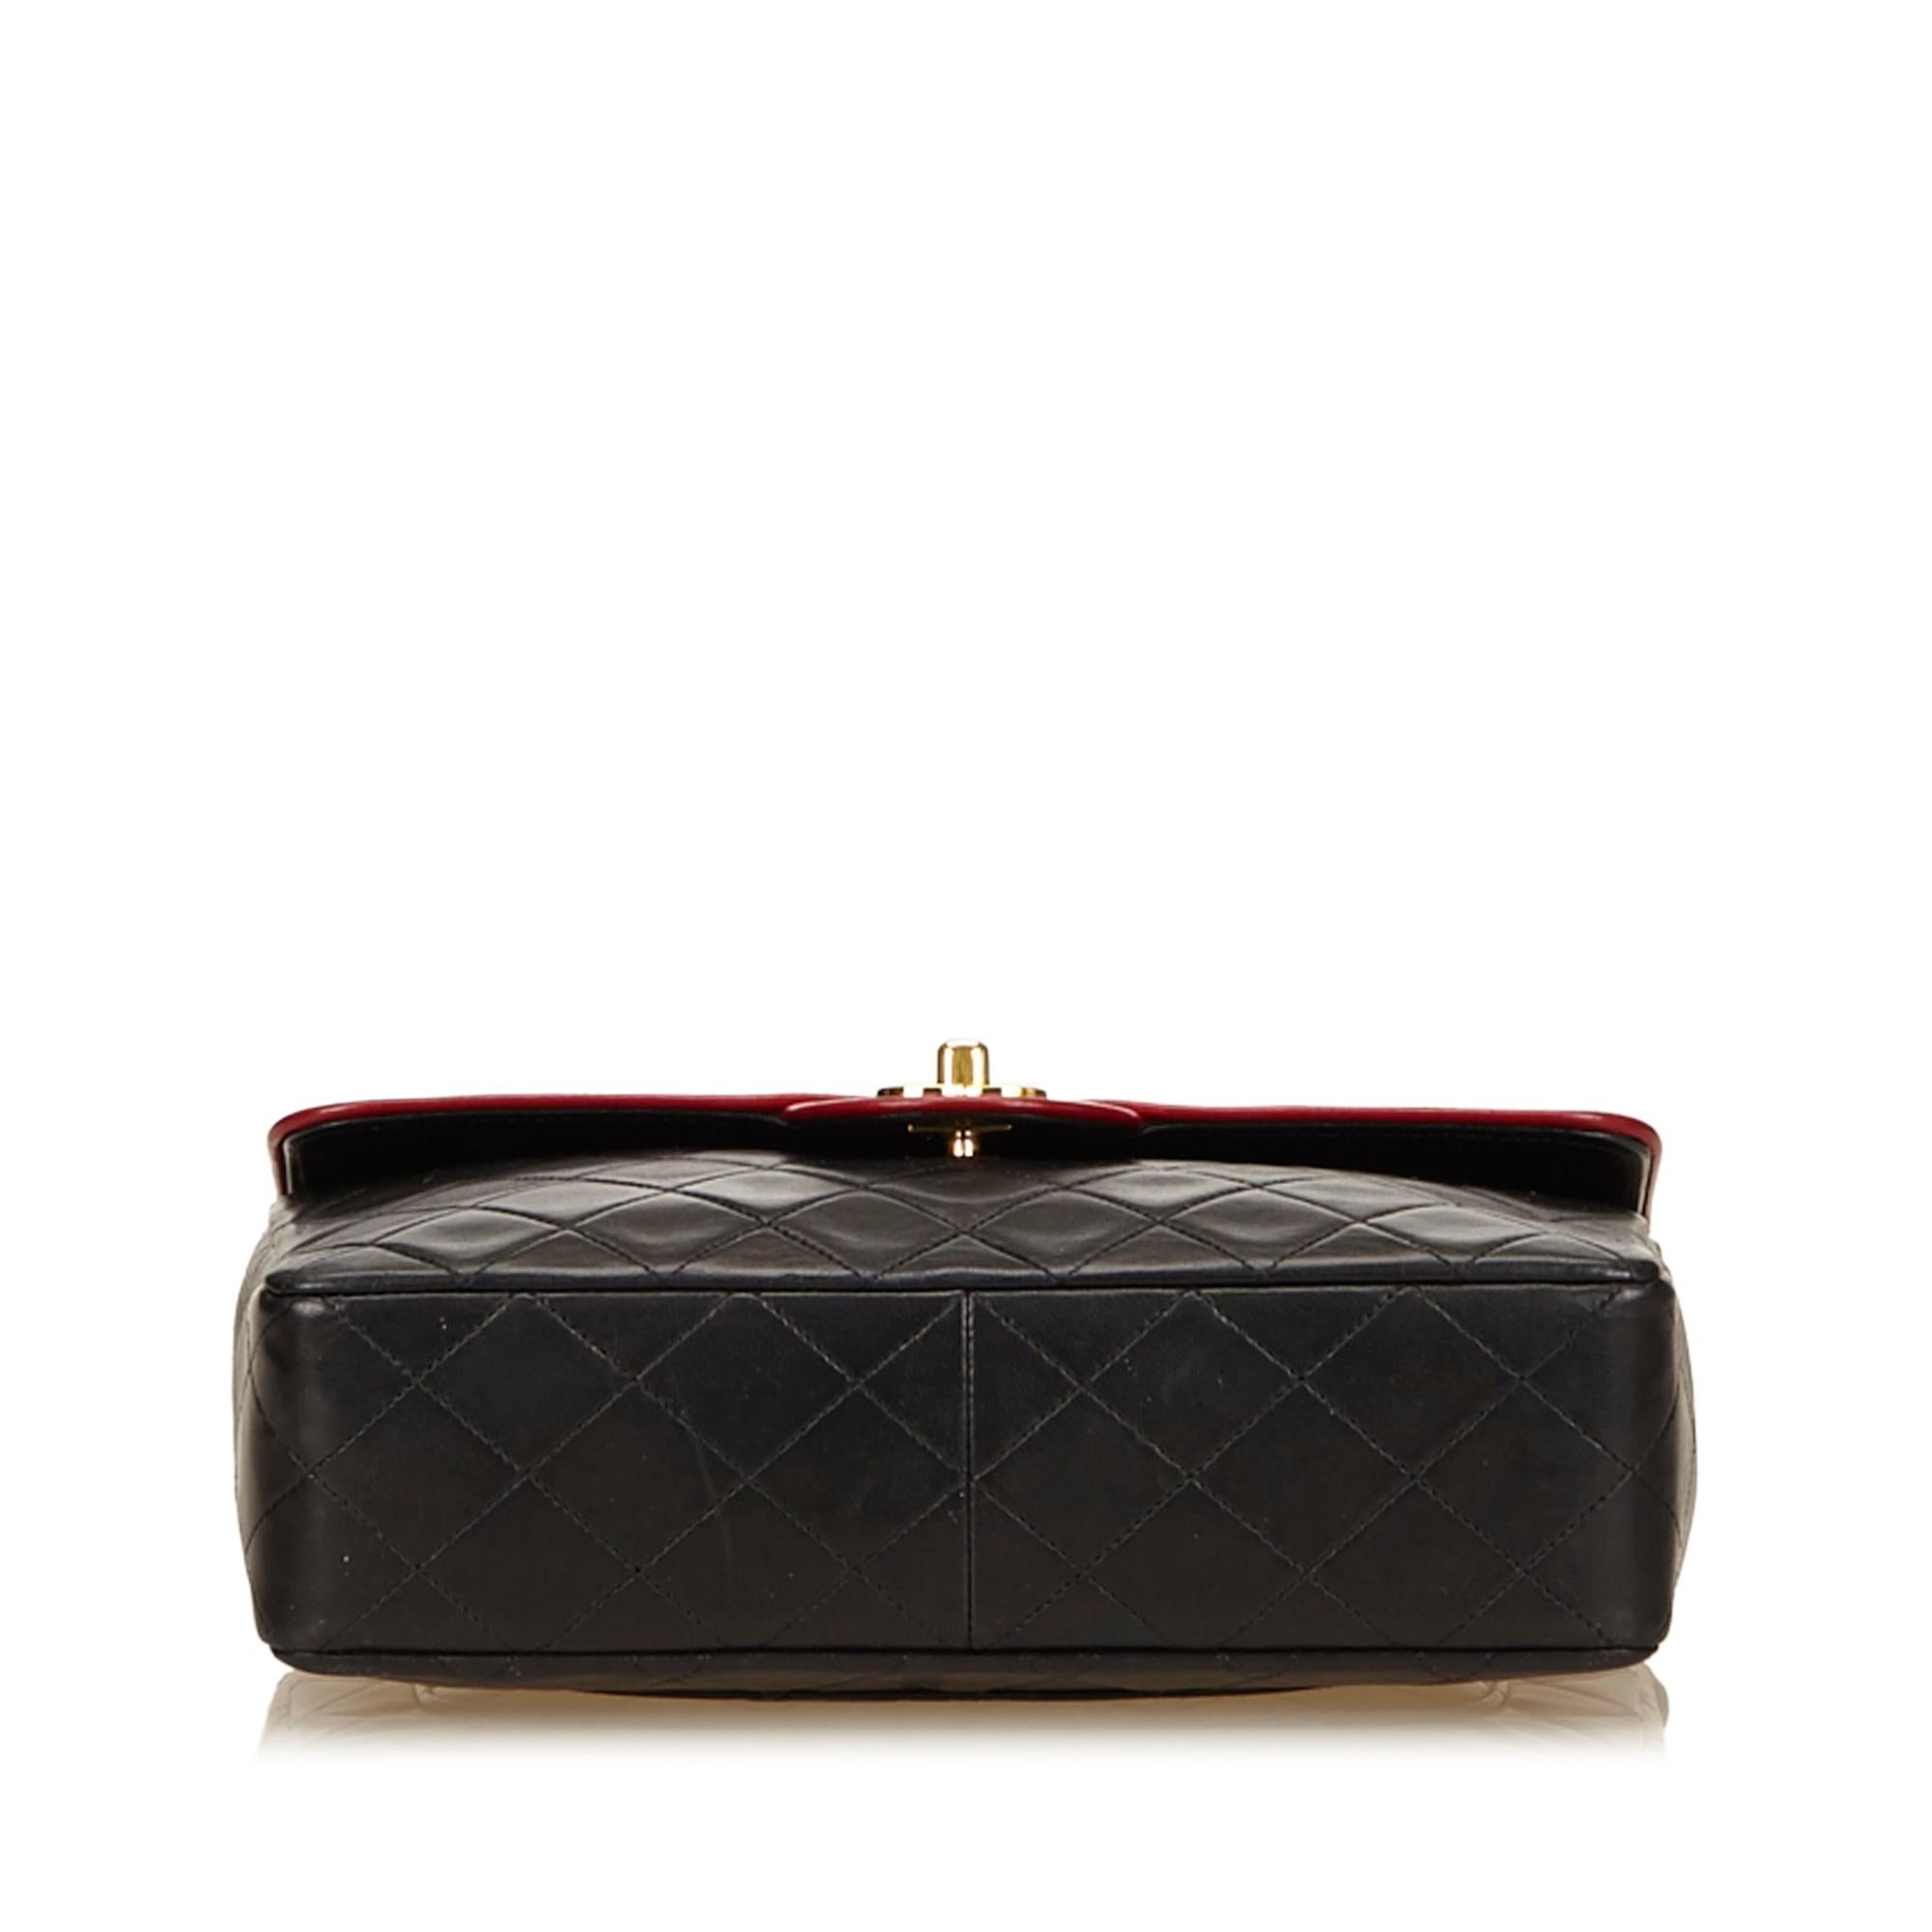 Chanel Quilted Leather Flap Bag im Zustand „Hervorragend“ in Thousand Oaks, CA